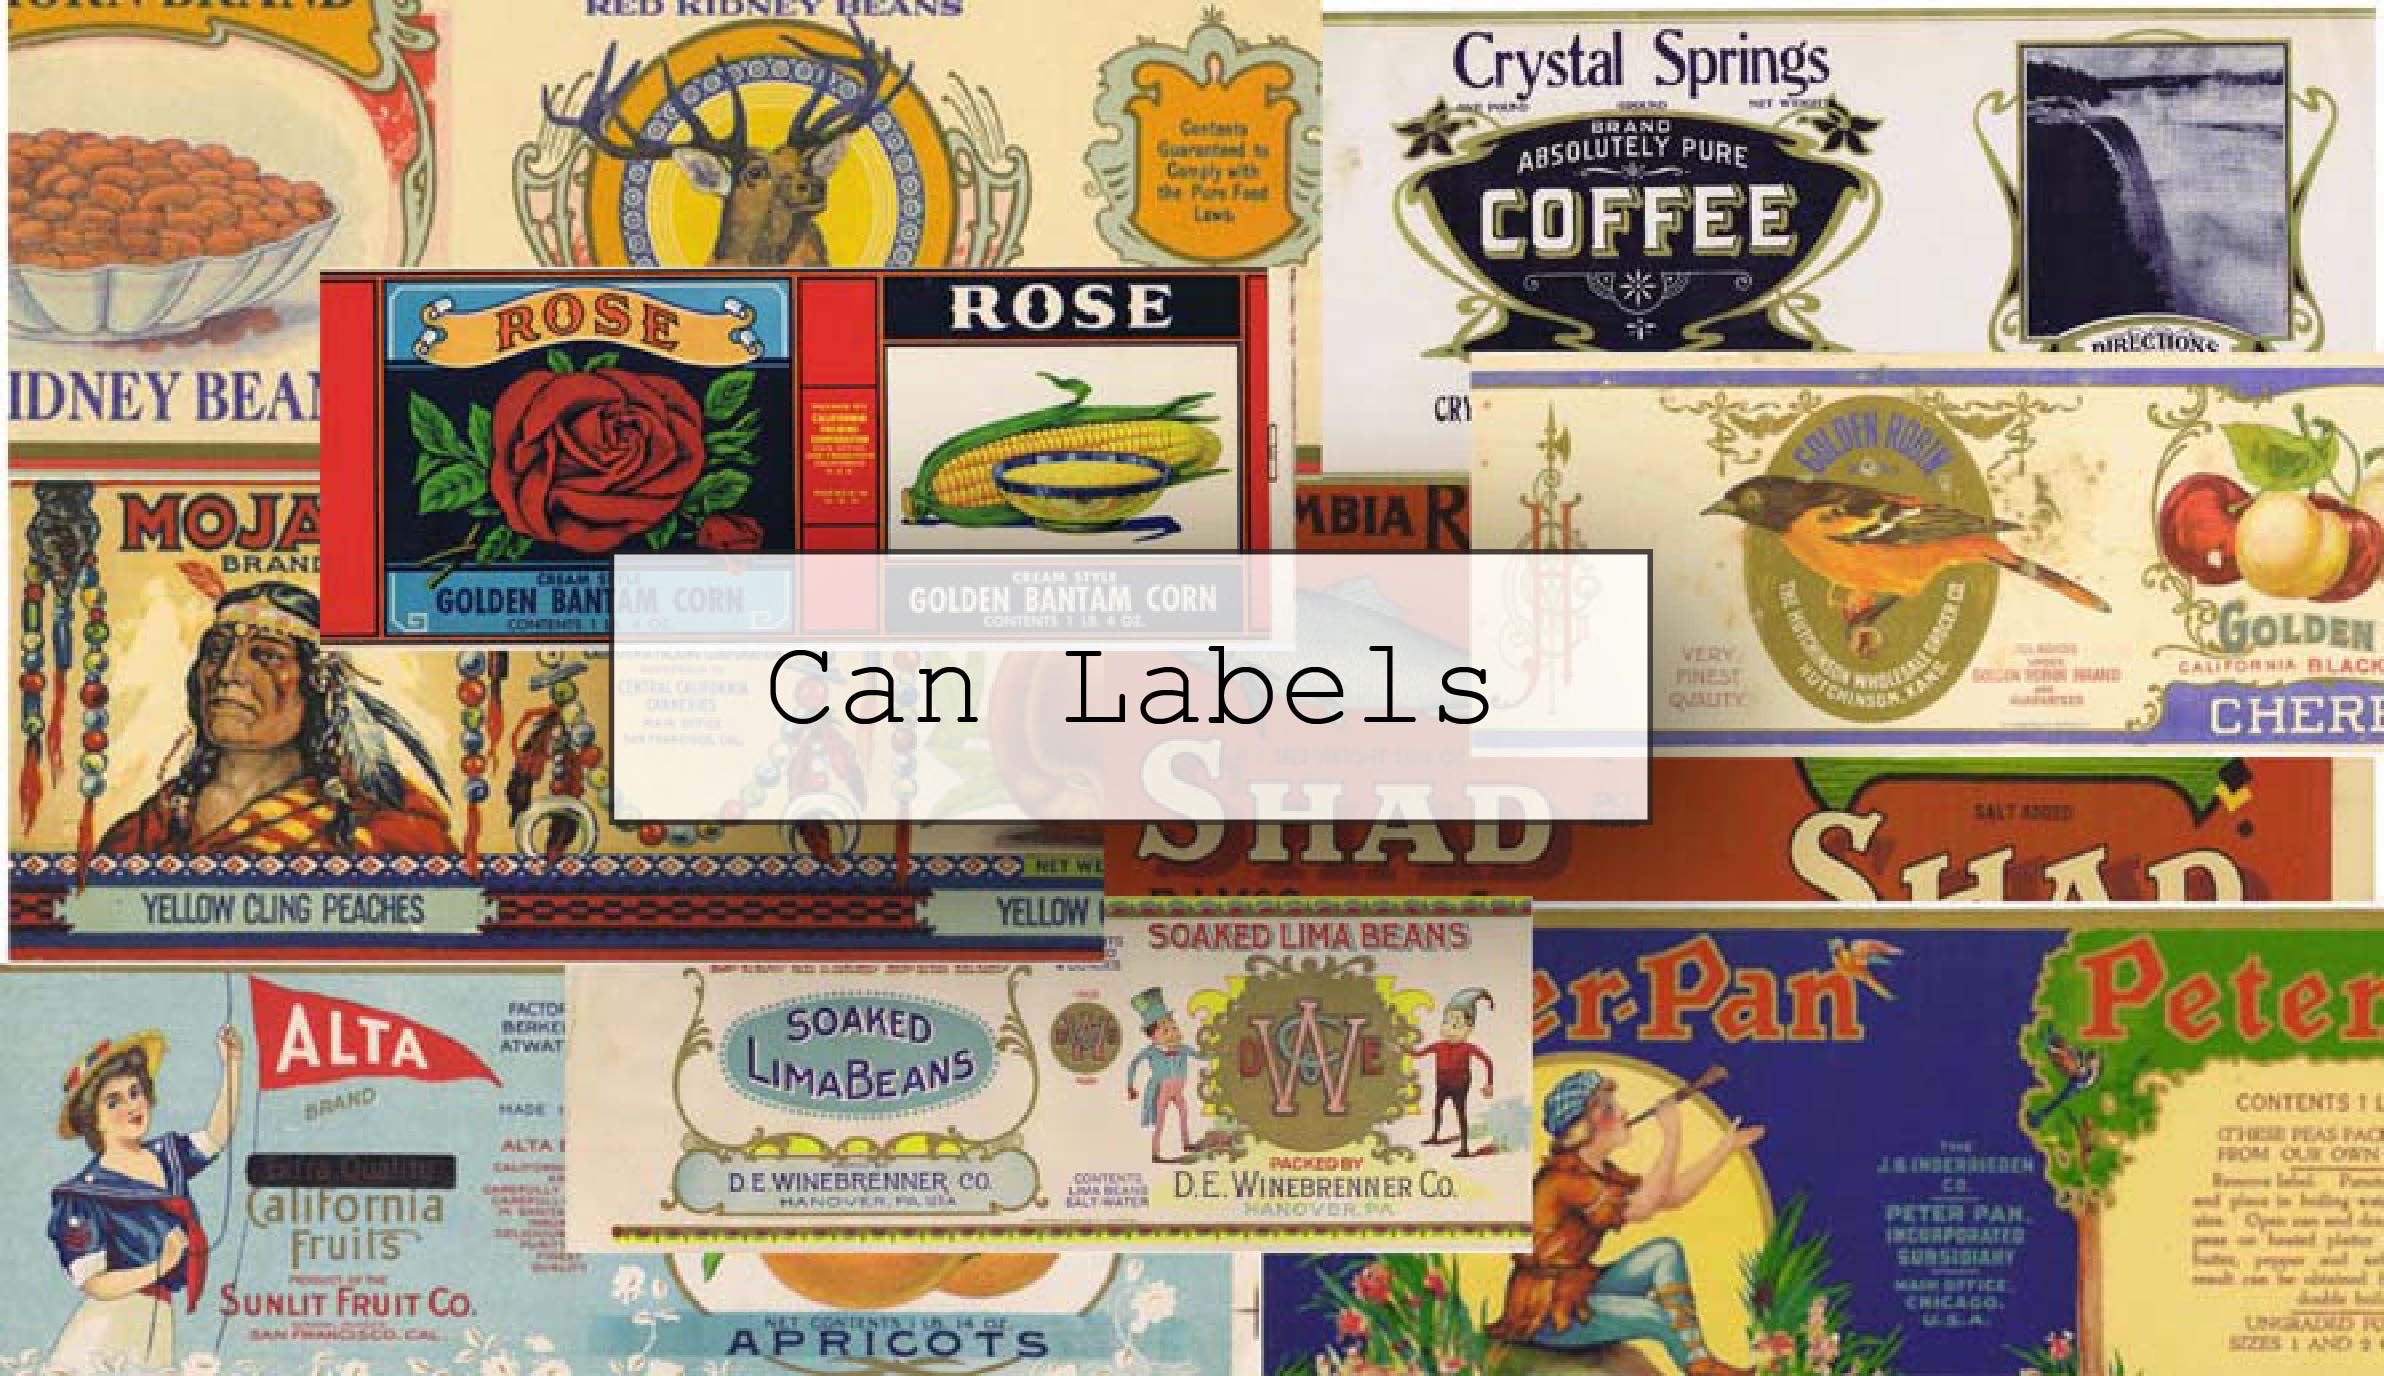 Can Labels